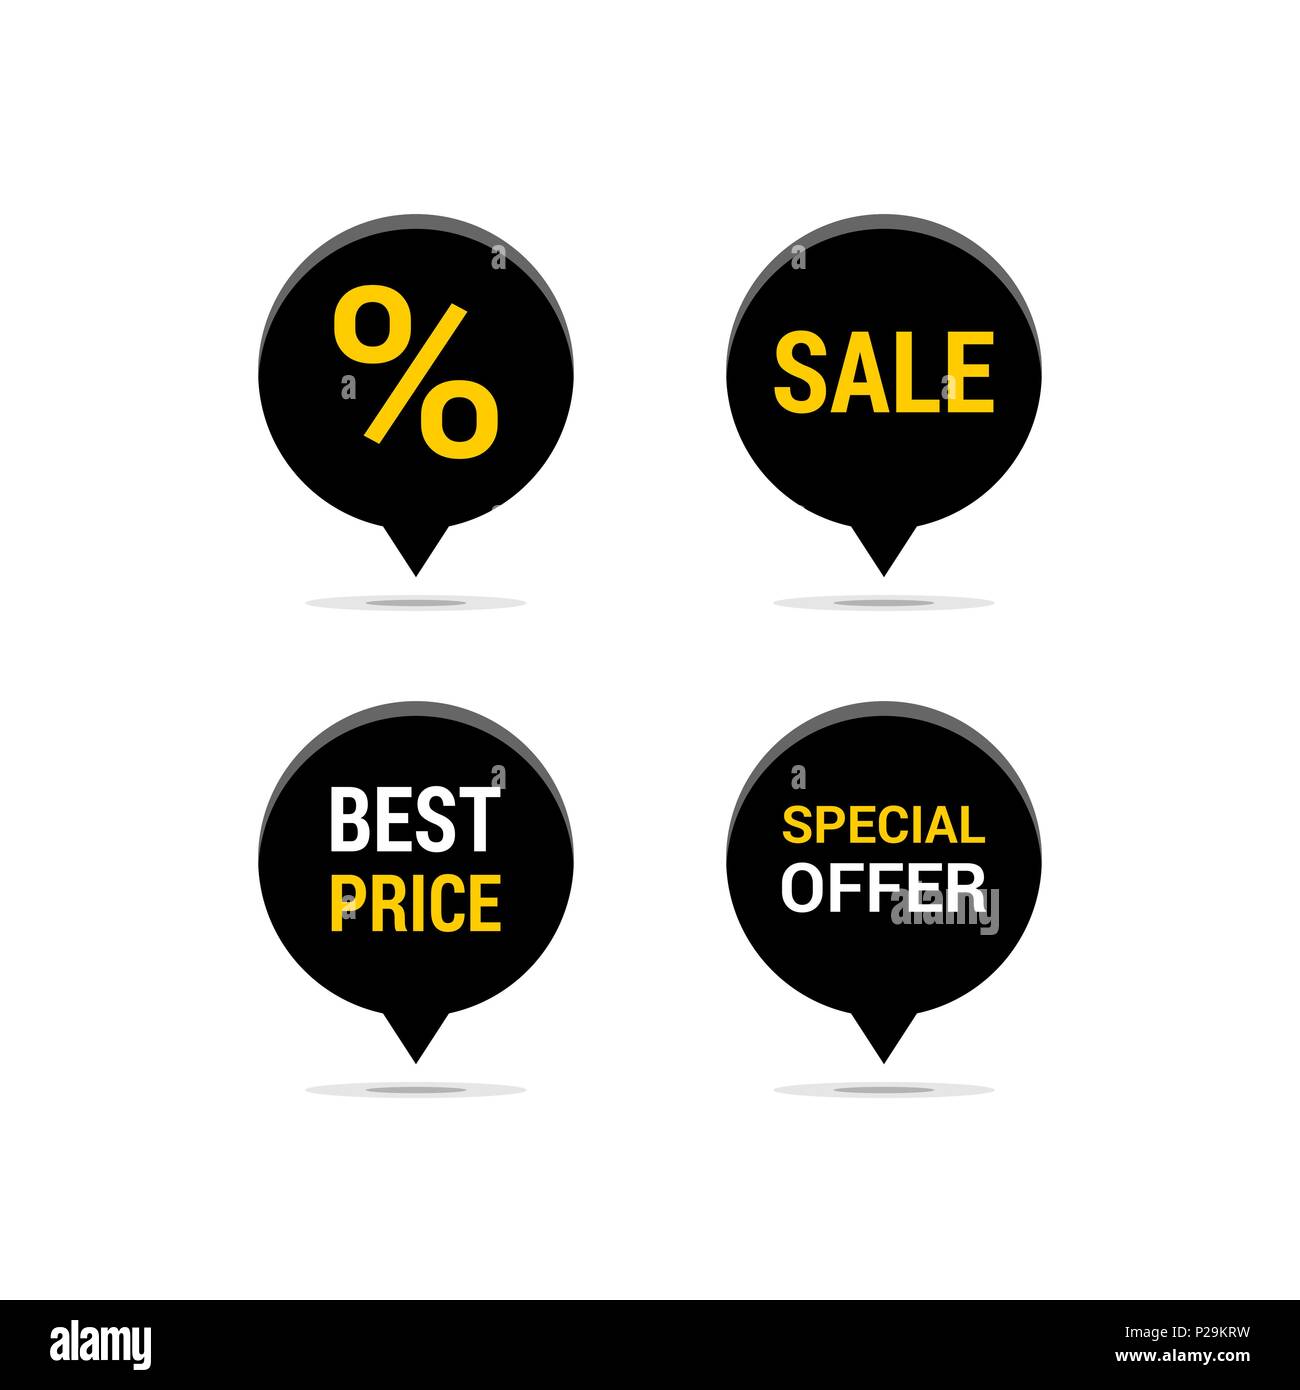 Best Deals Signs Shows Cheap Promotion and Sales Stock